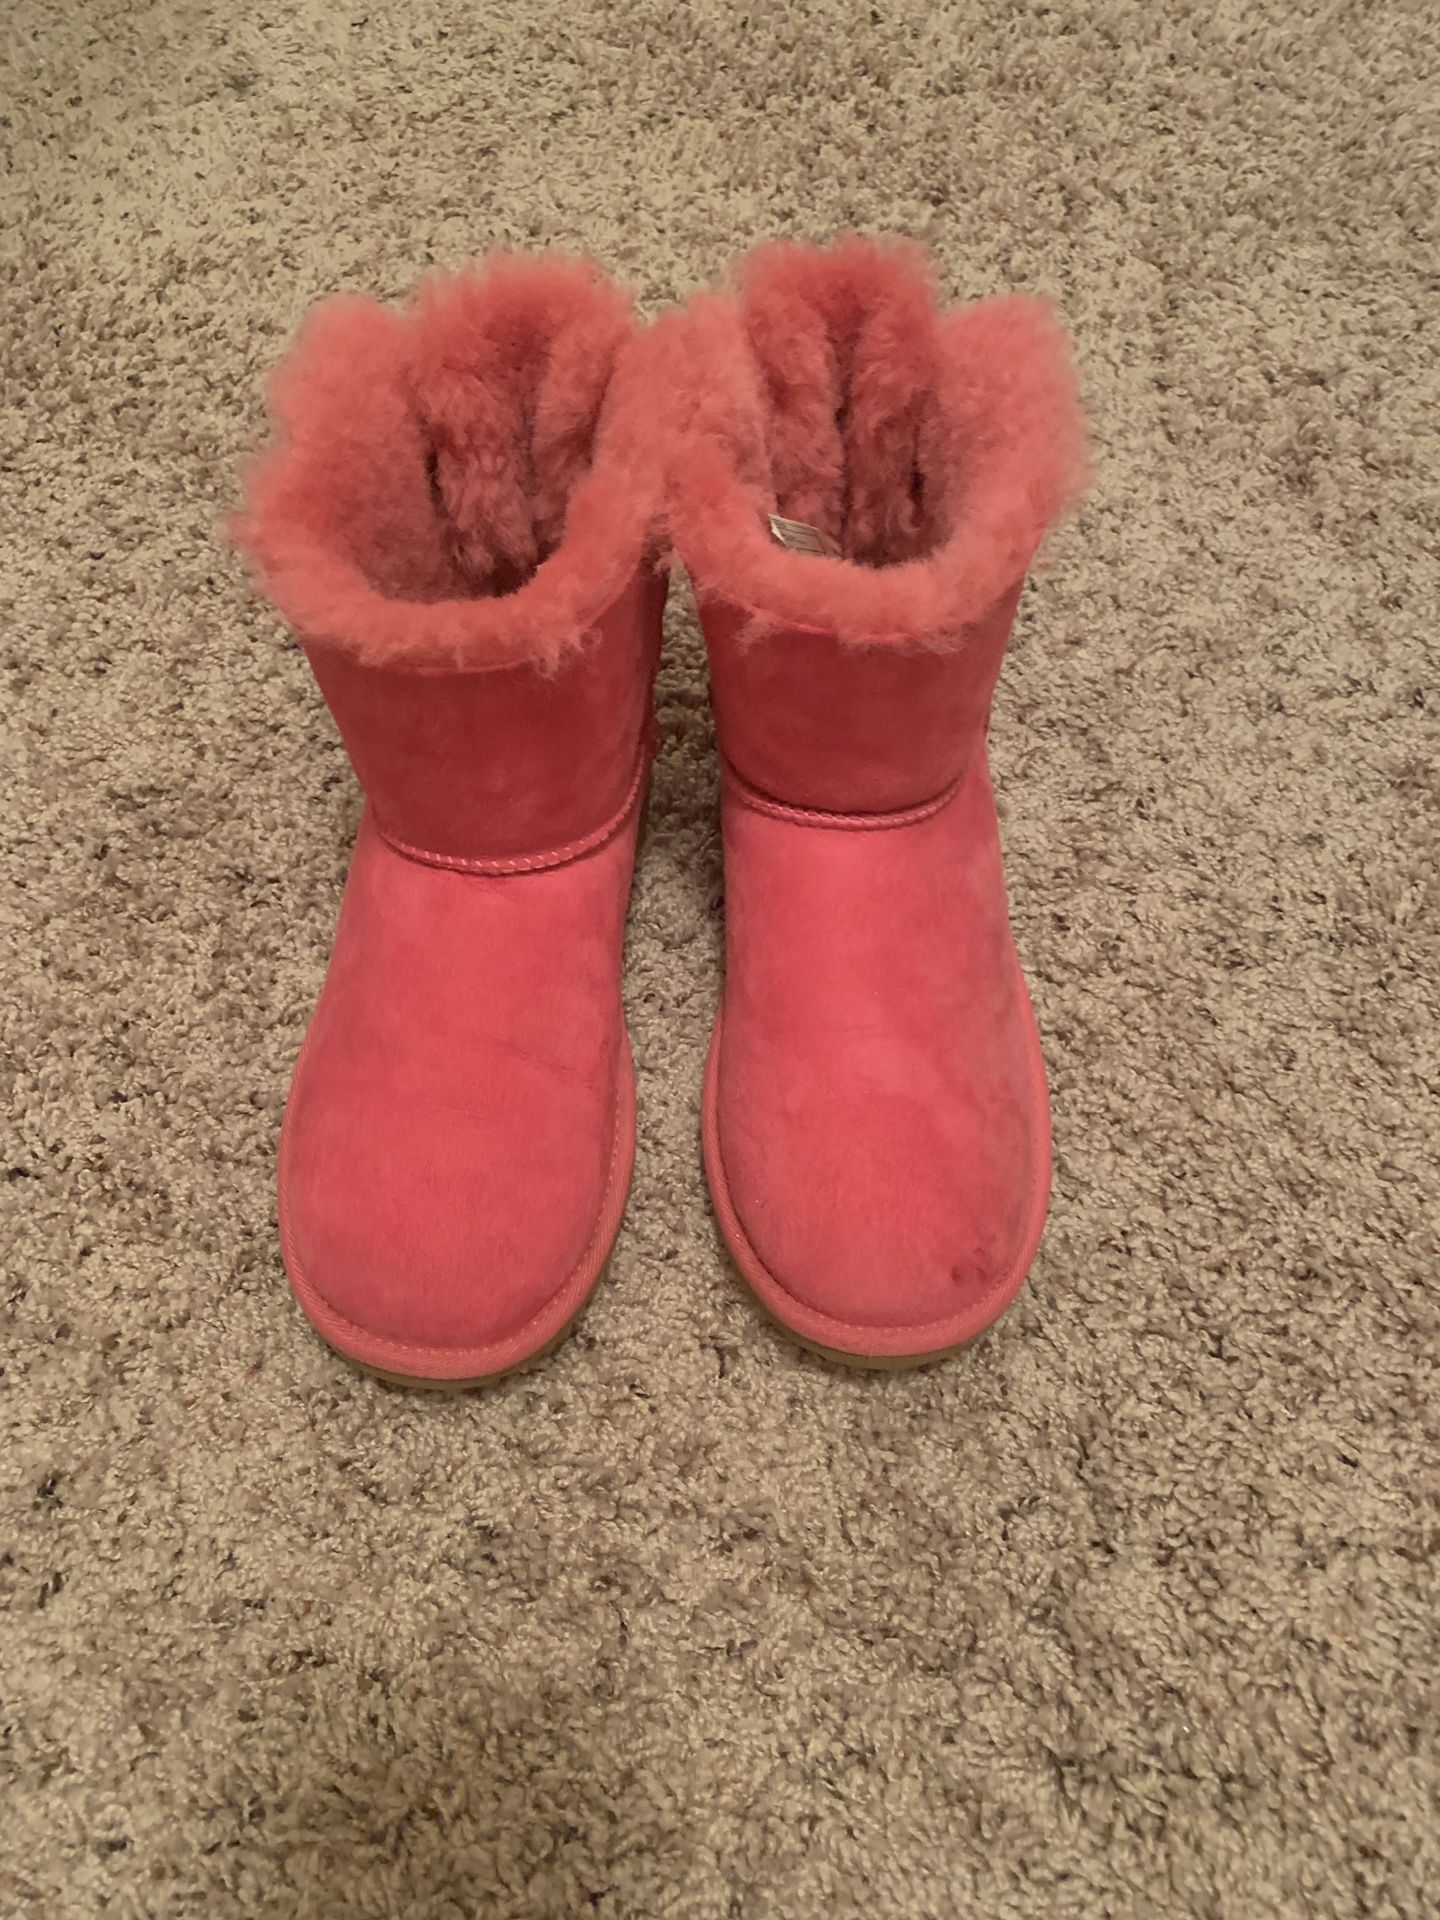 Women’s Size 6 Ugg Boots